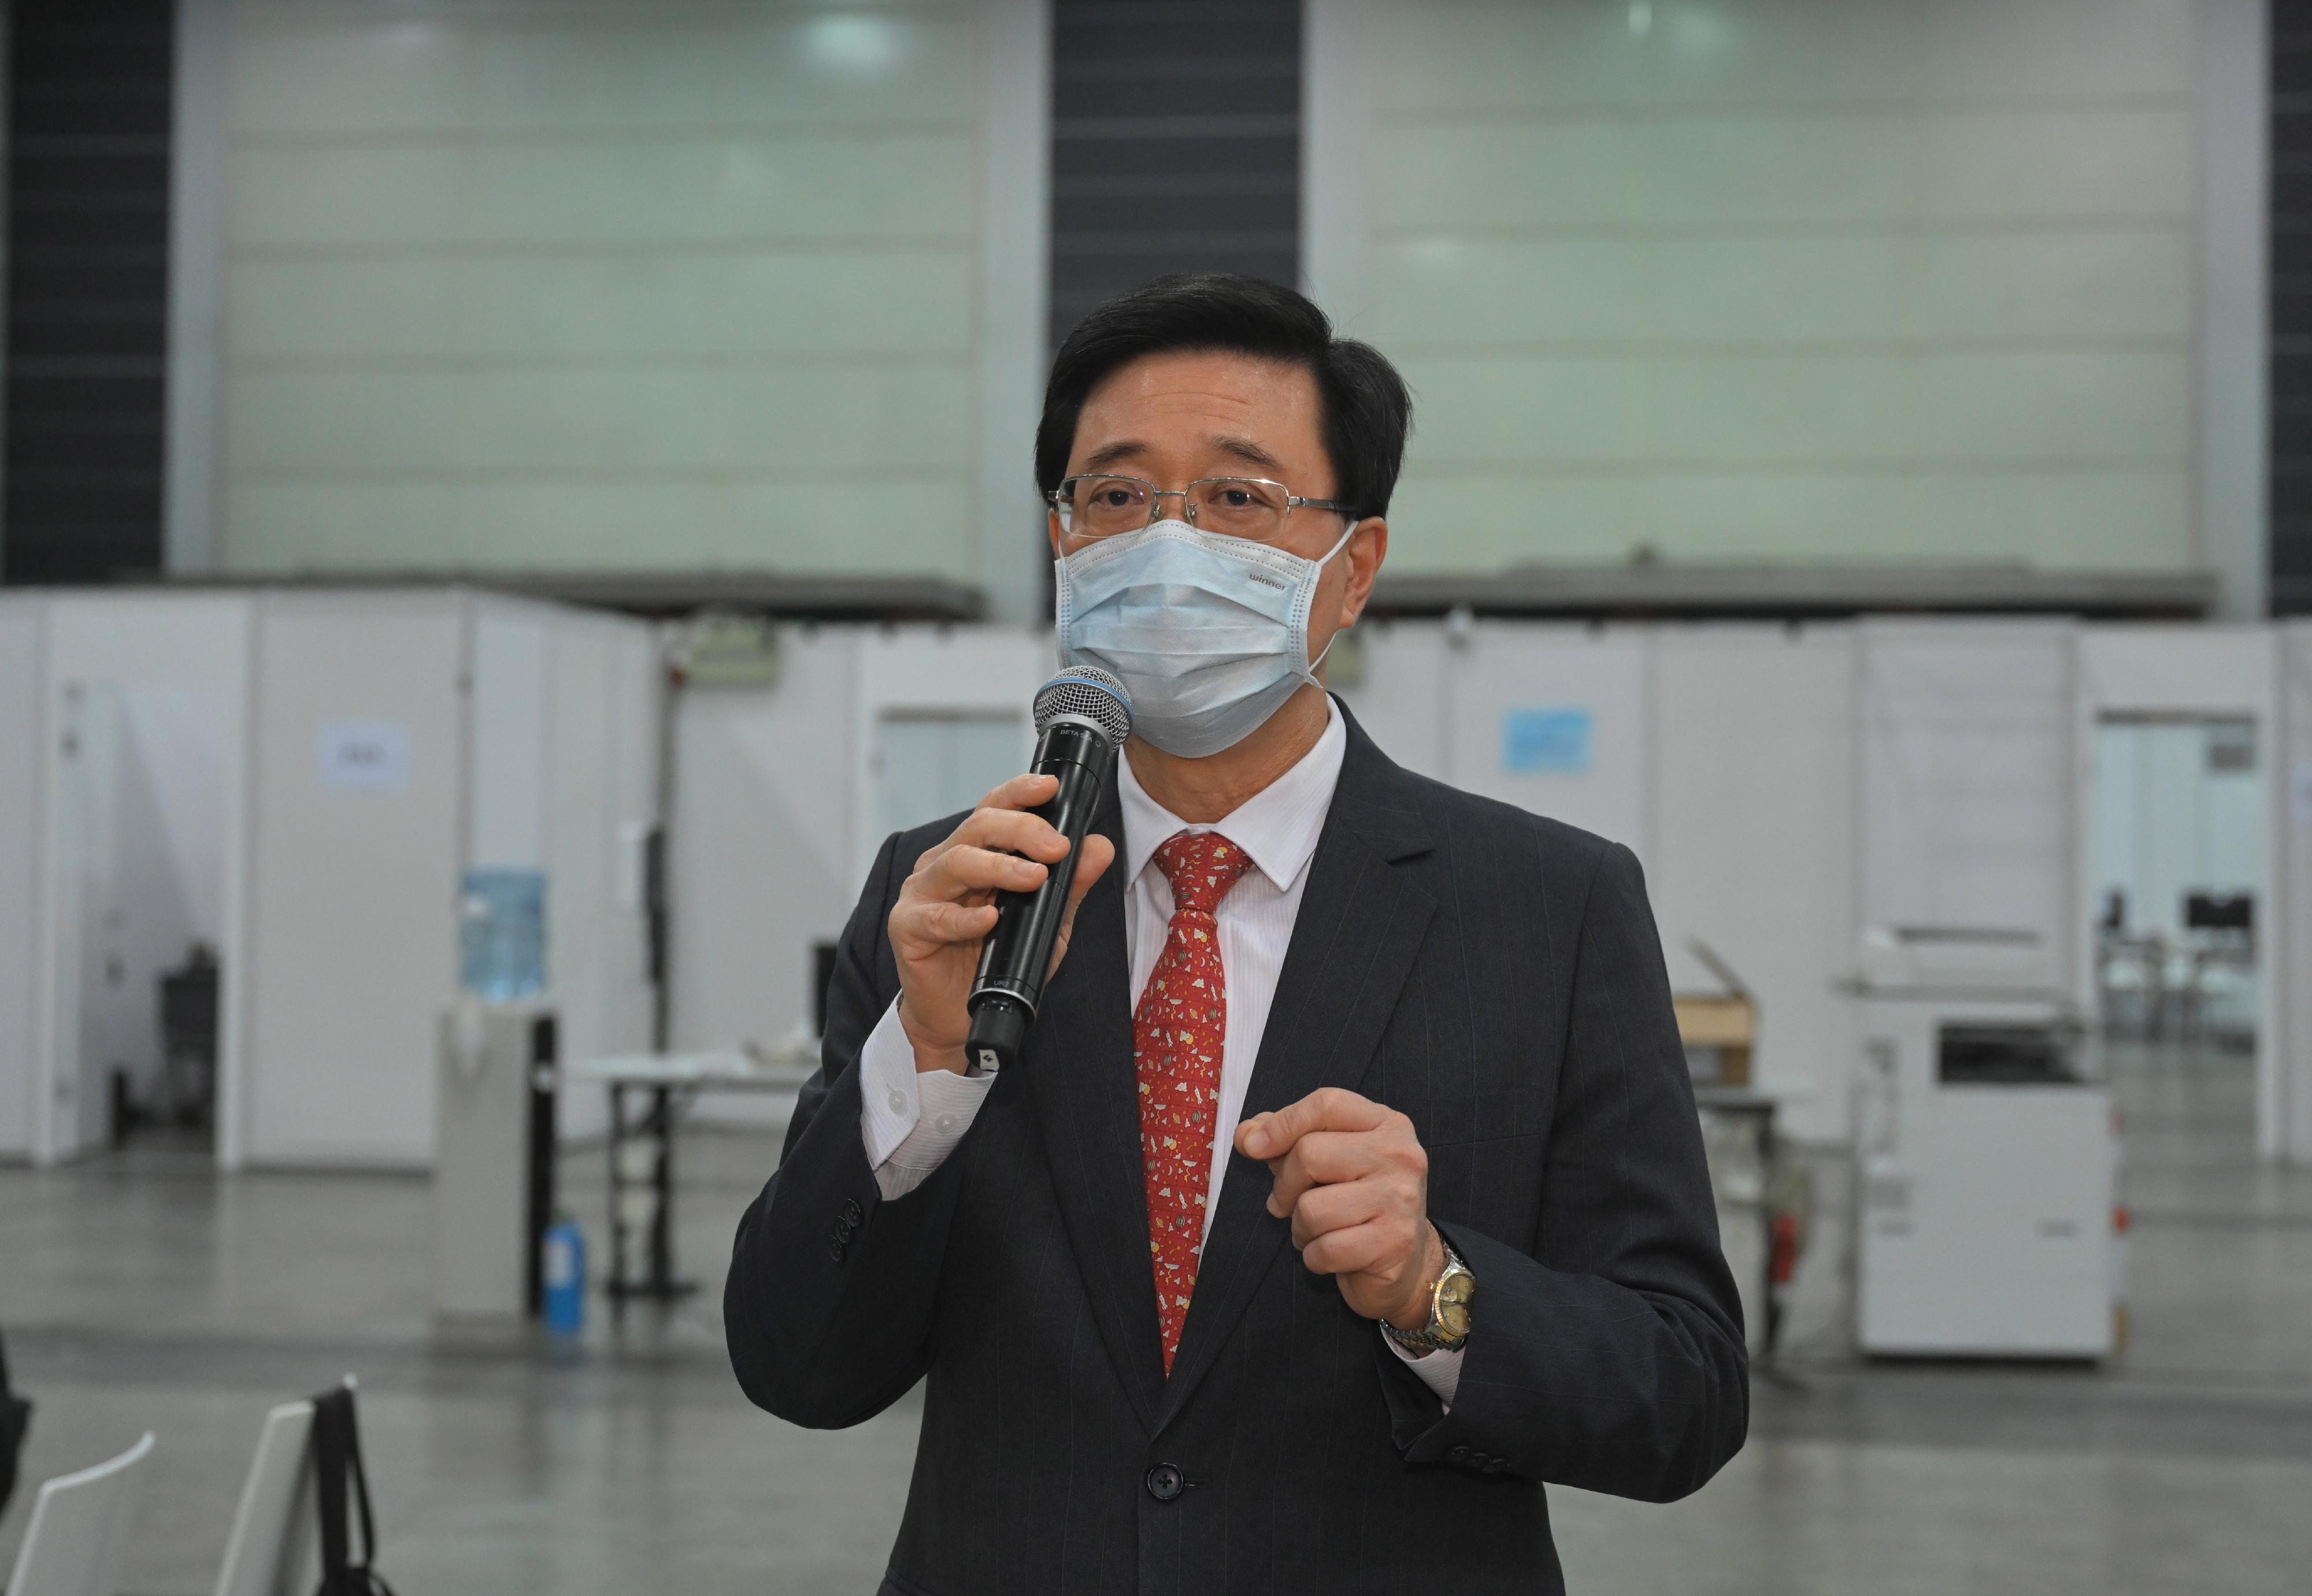 The Chief Secretary for Administration, Mr John Lee, visited the Hong Kong Convention and Exhibition Centre today (December 17) to inspect the preparatory work progress of the central counting station for the Legislative Council General Election. Photo shows Mr Lee showing support for the electoral staff and calling on them to devote themselves to running the upcoming election.